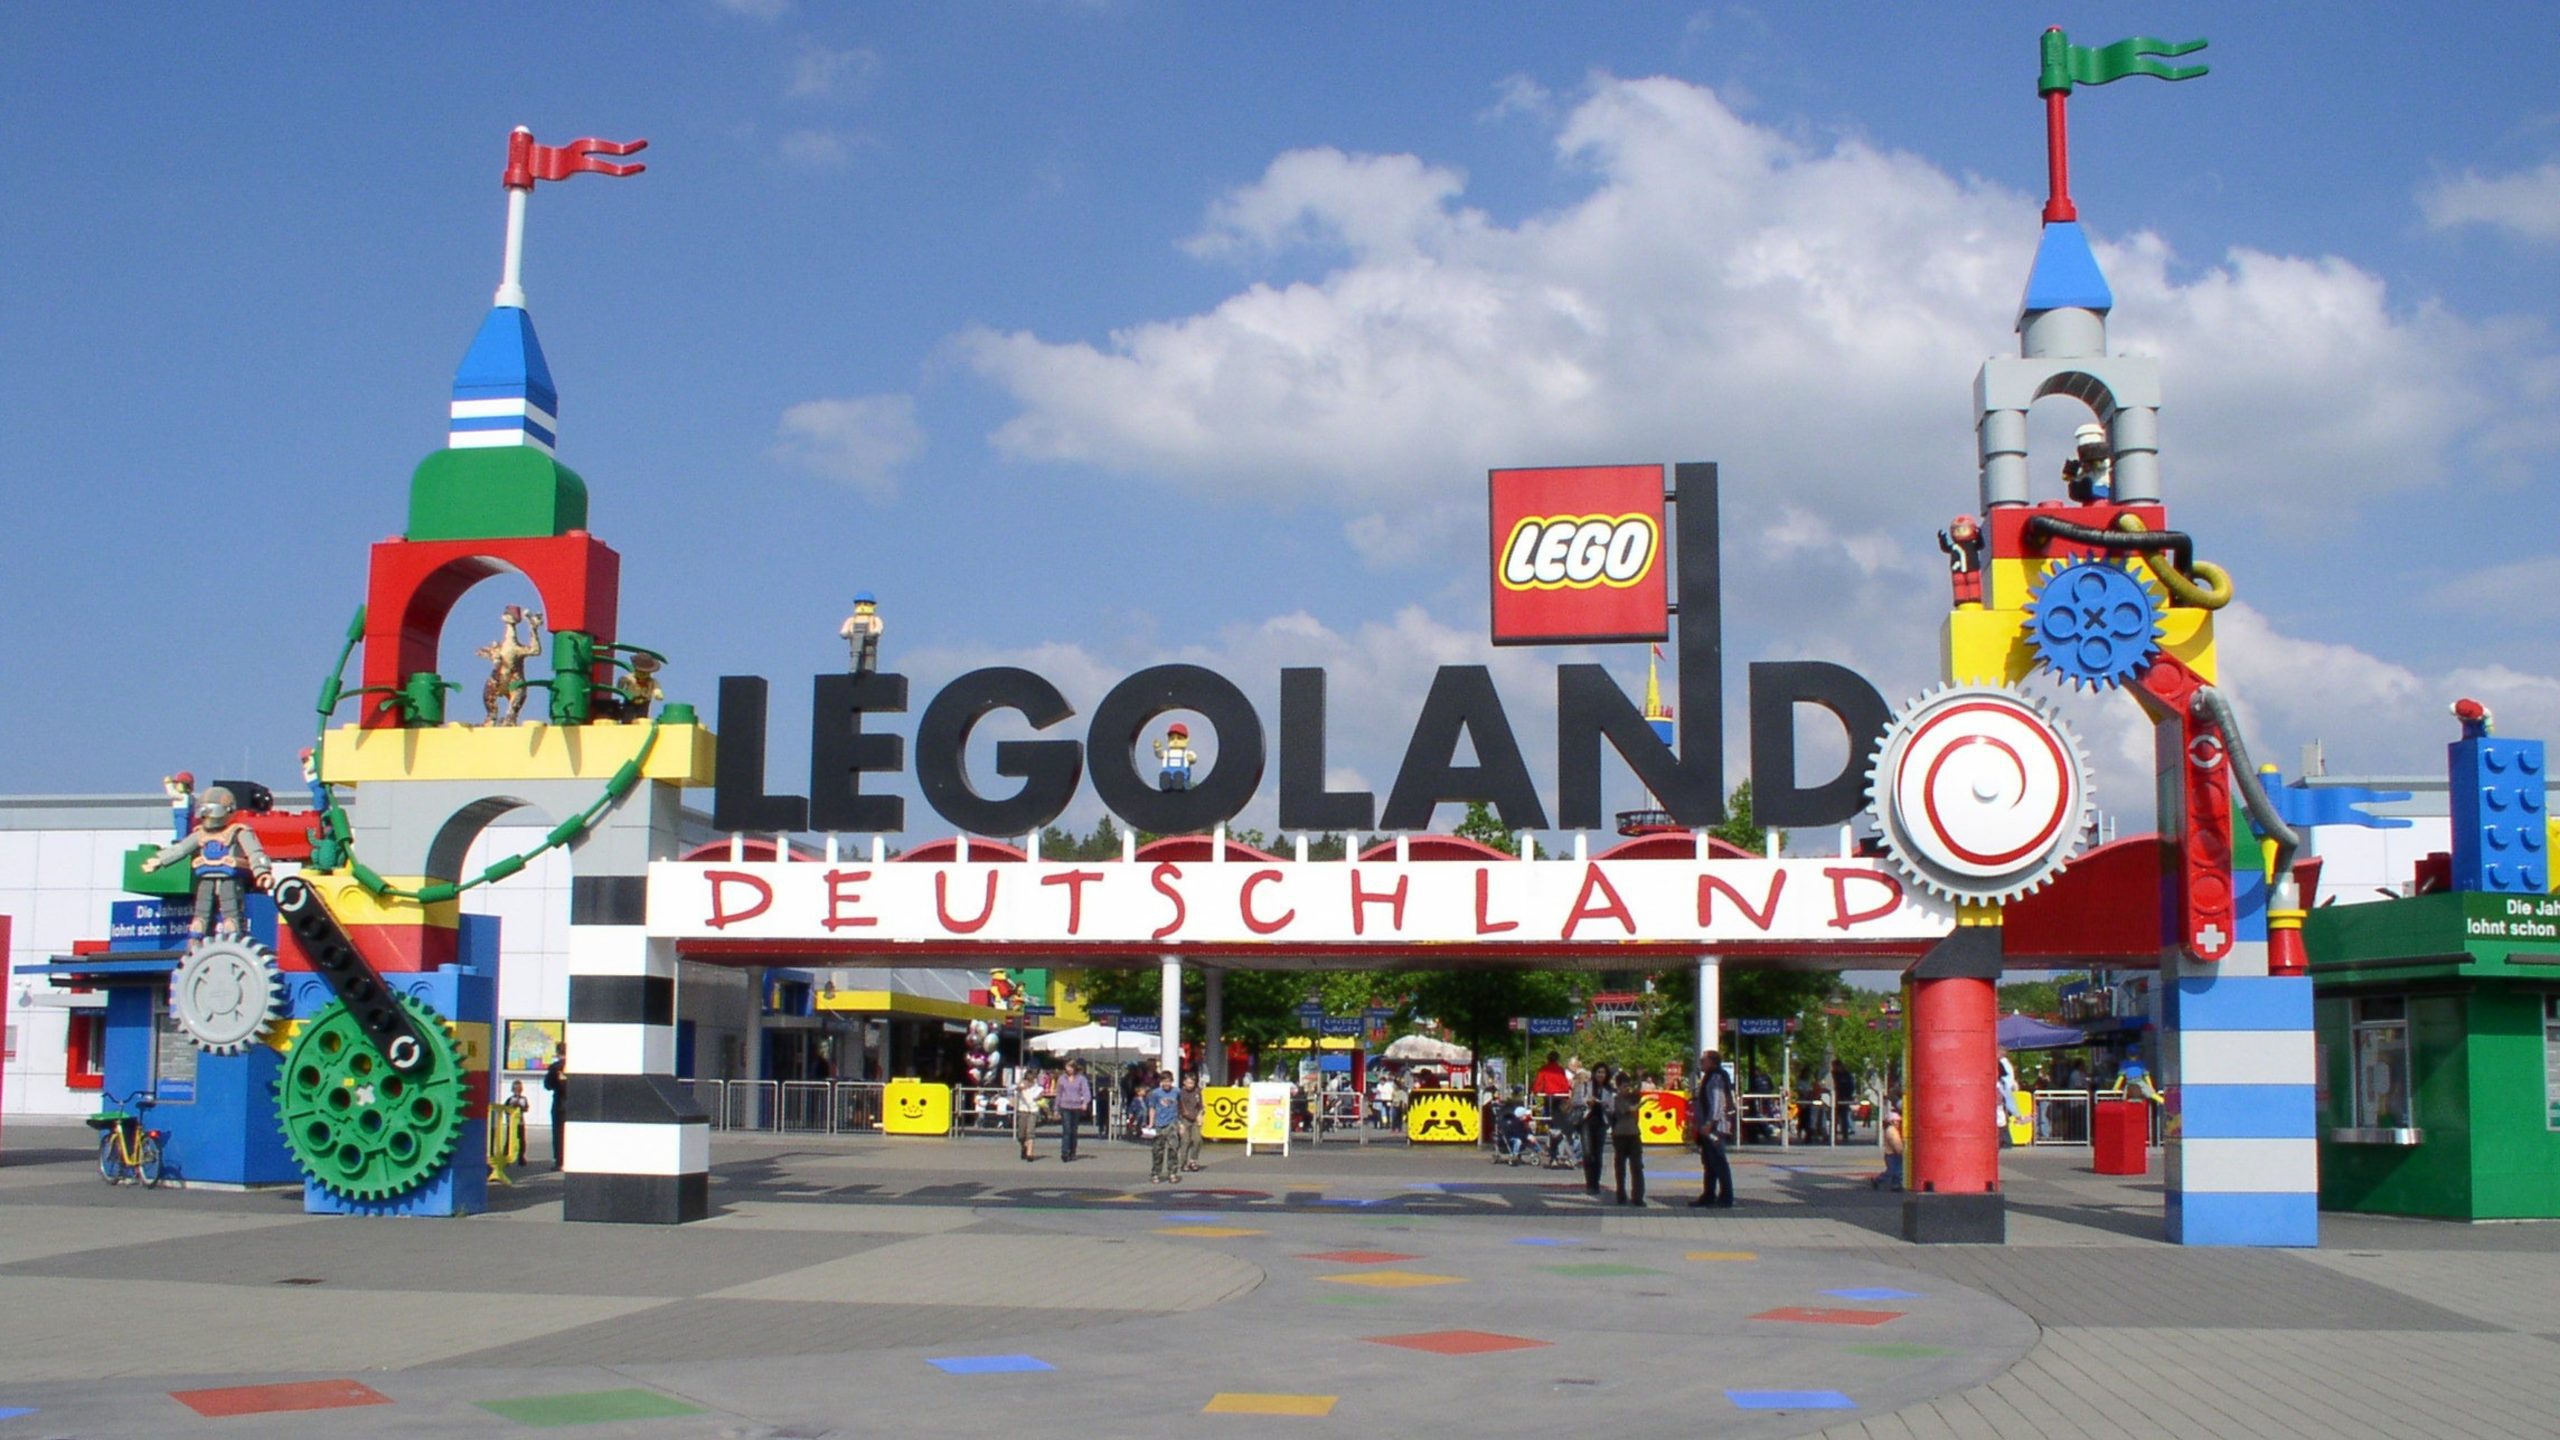 Visit Legoland Billund - the fifth thing in the 10 best things to do in Denmark